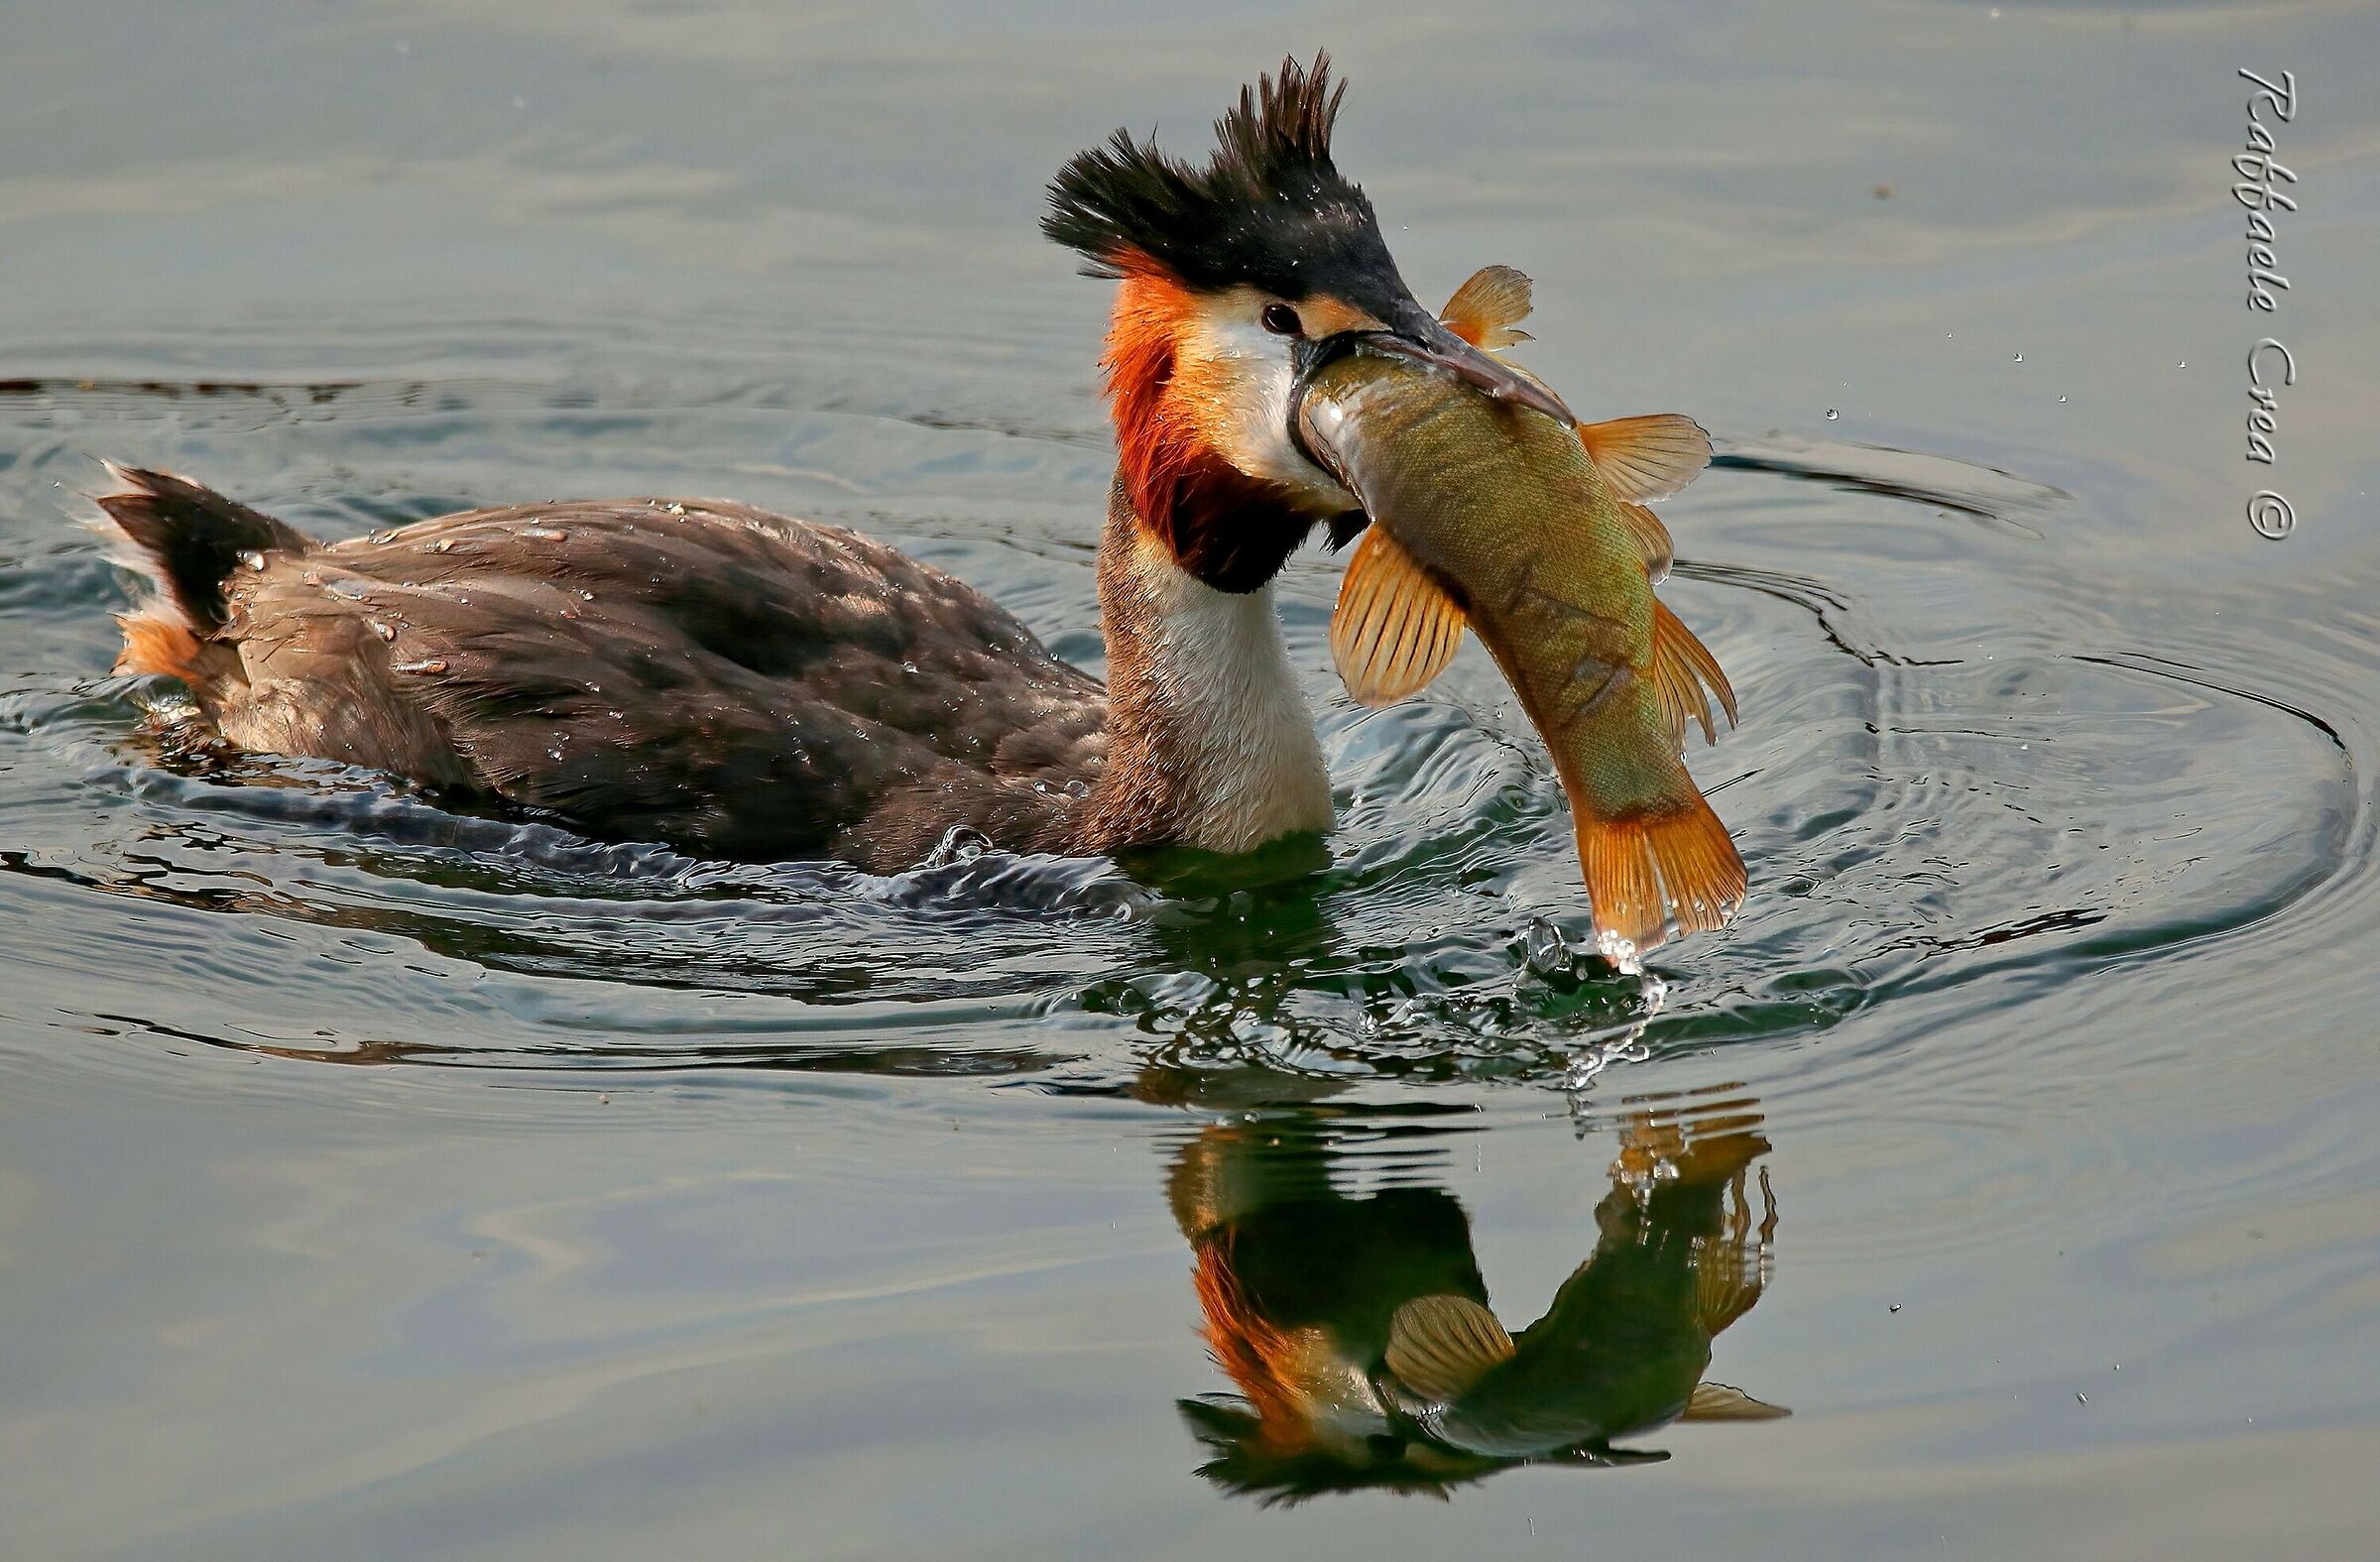 The Great Grebe and the Tinca...